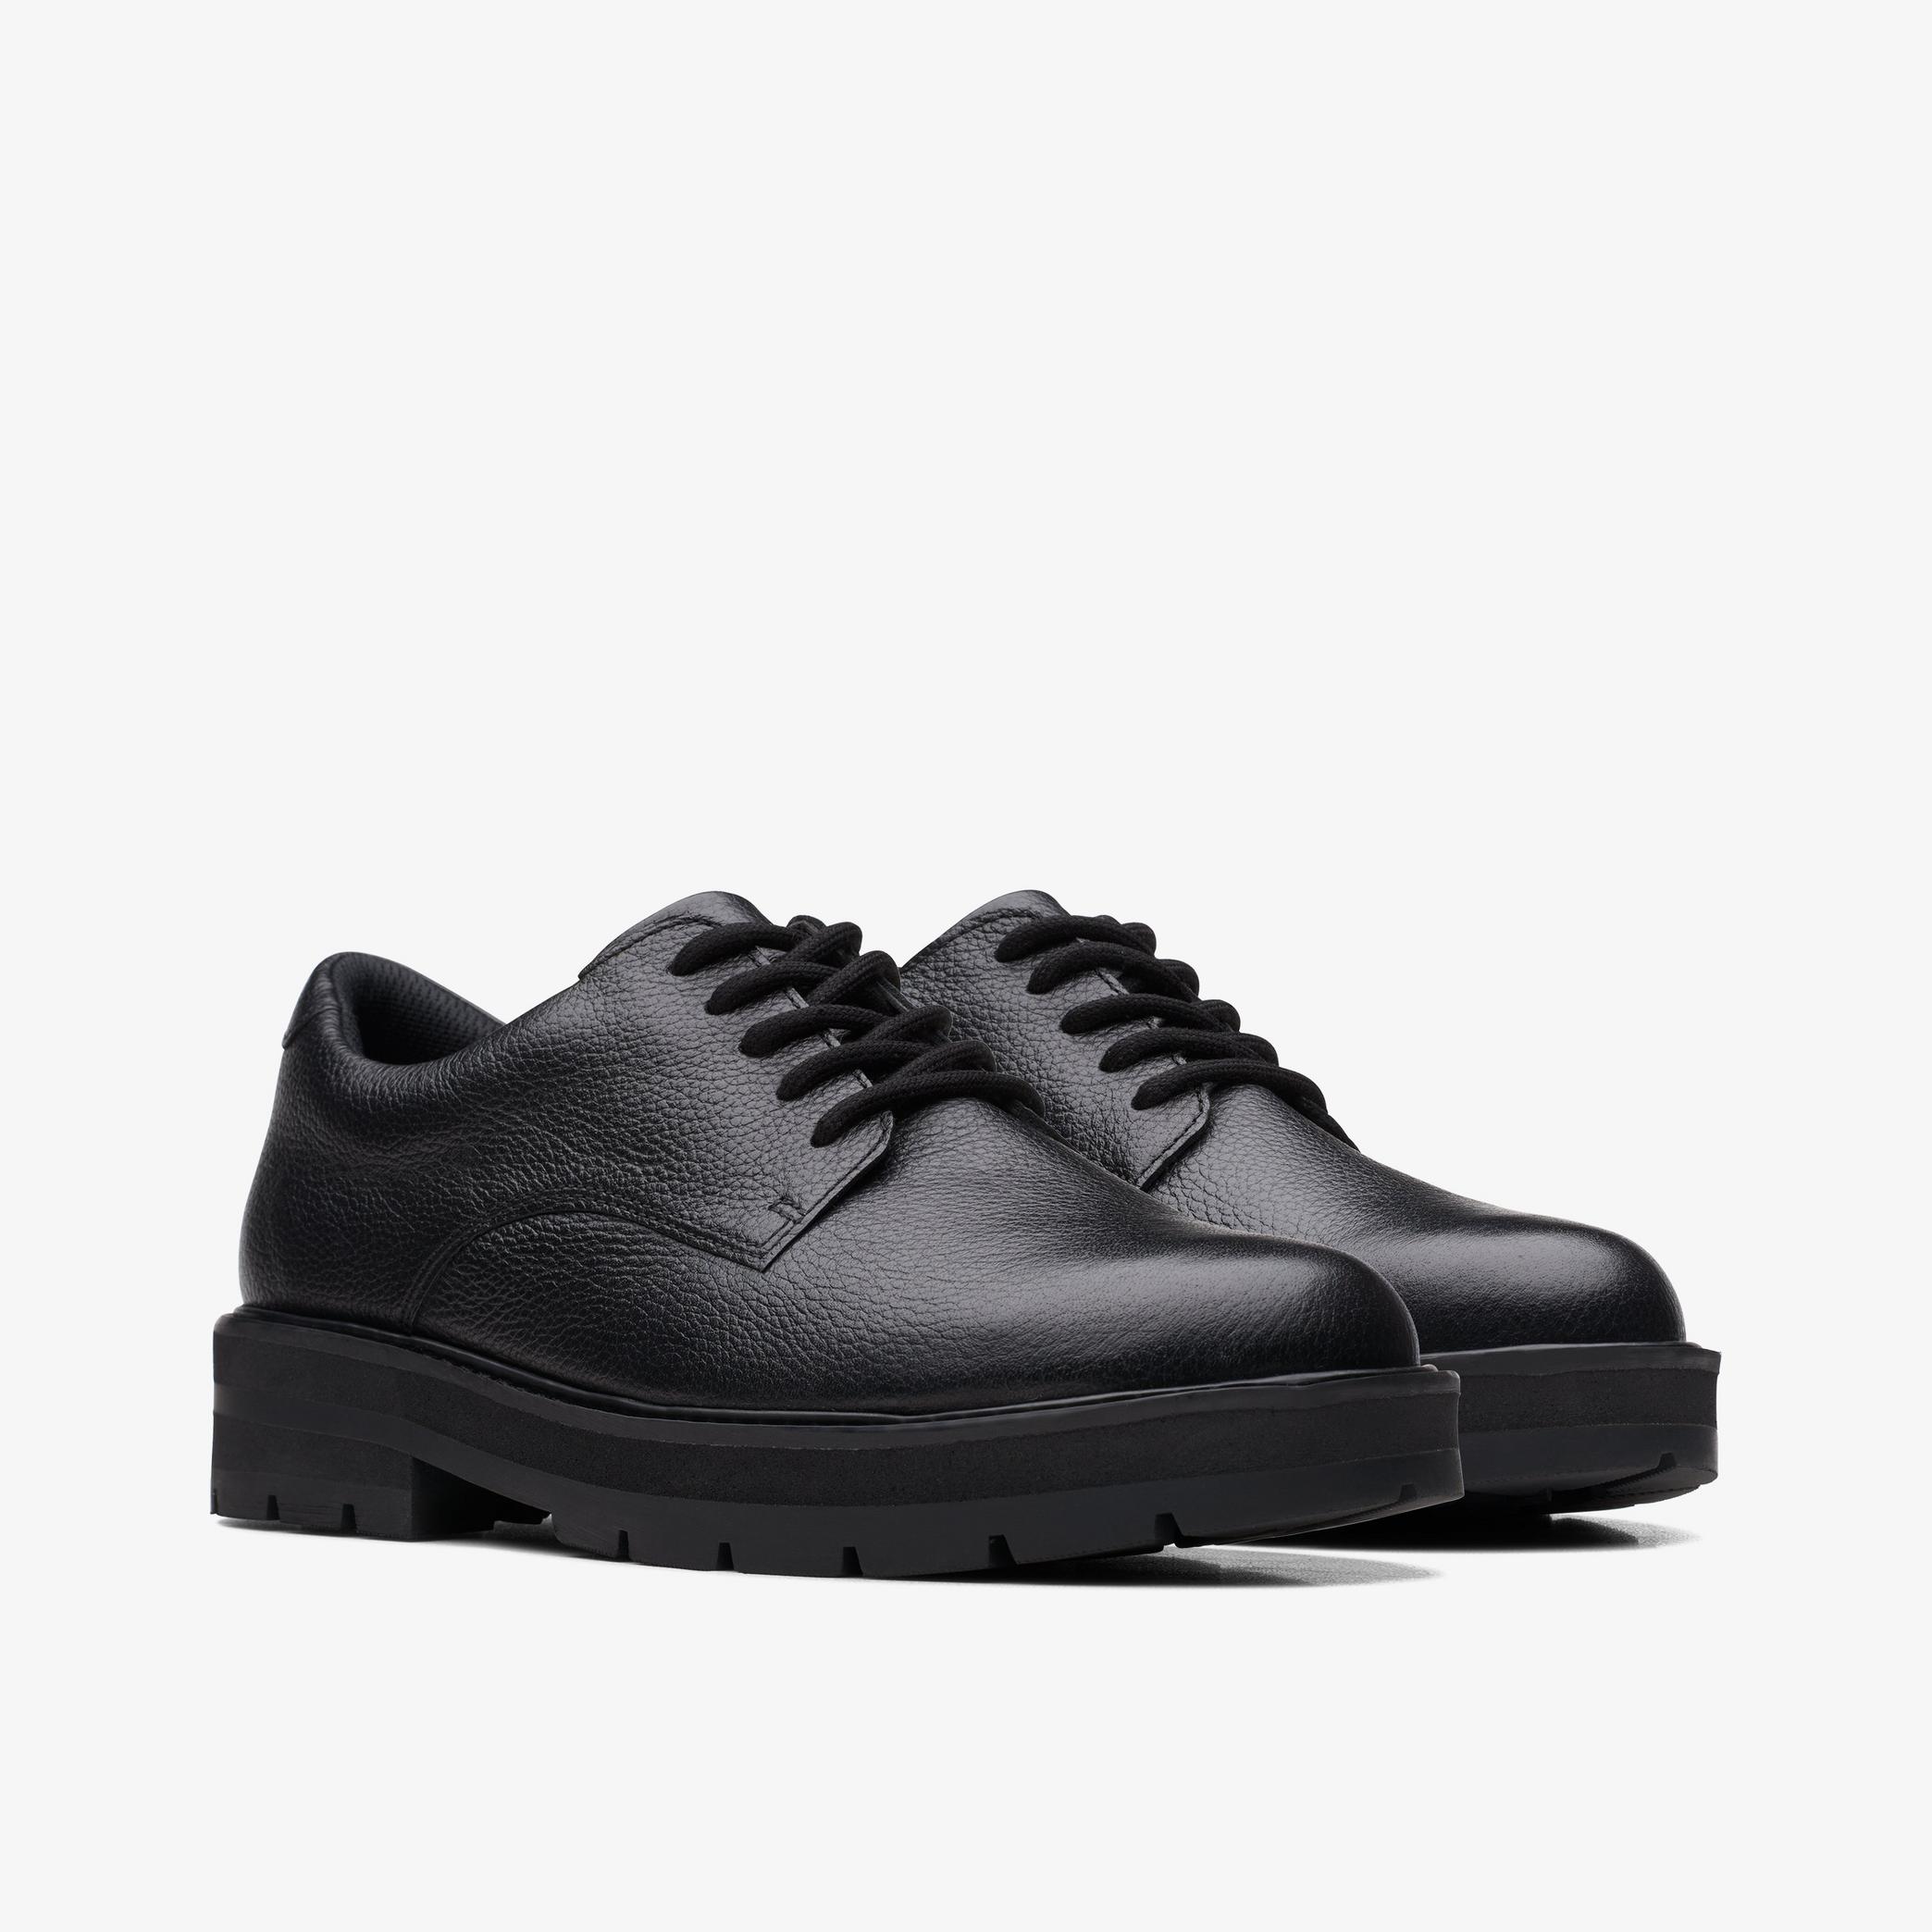 Prague Lace Youth Black Leather Brogues, view 4 of 6